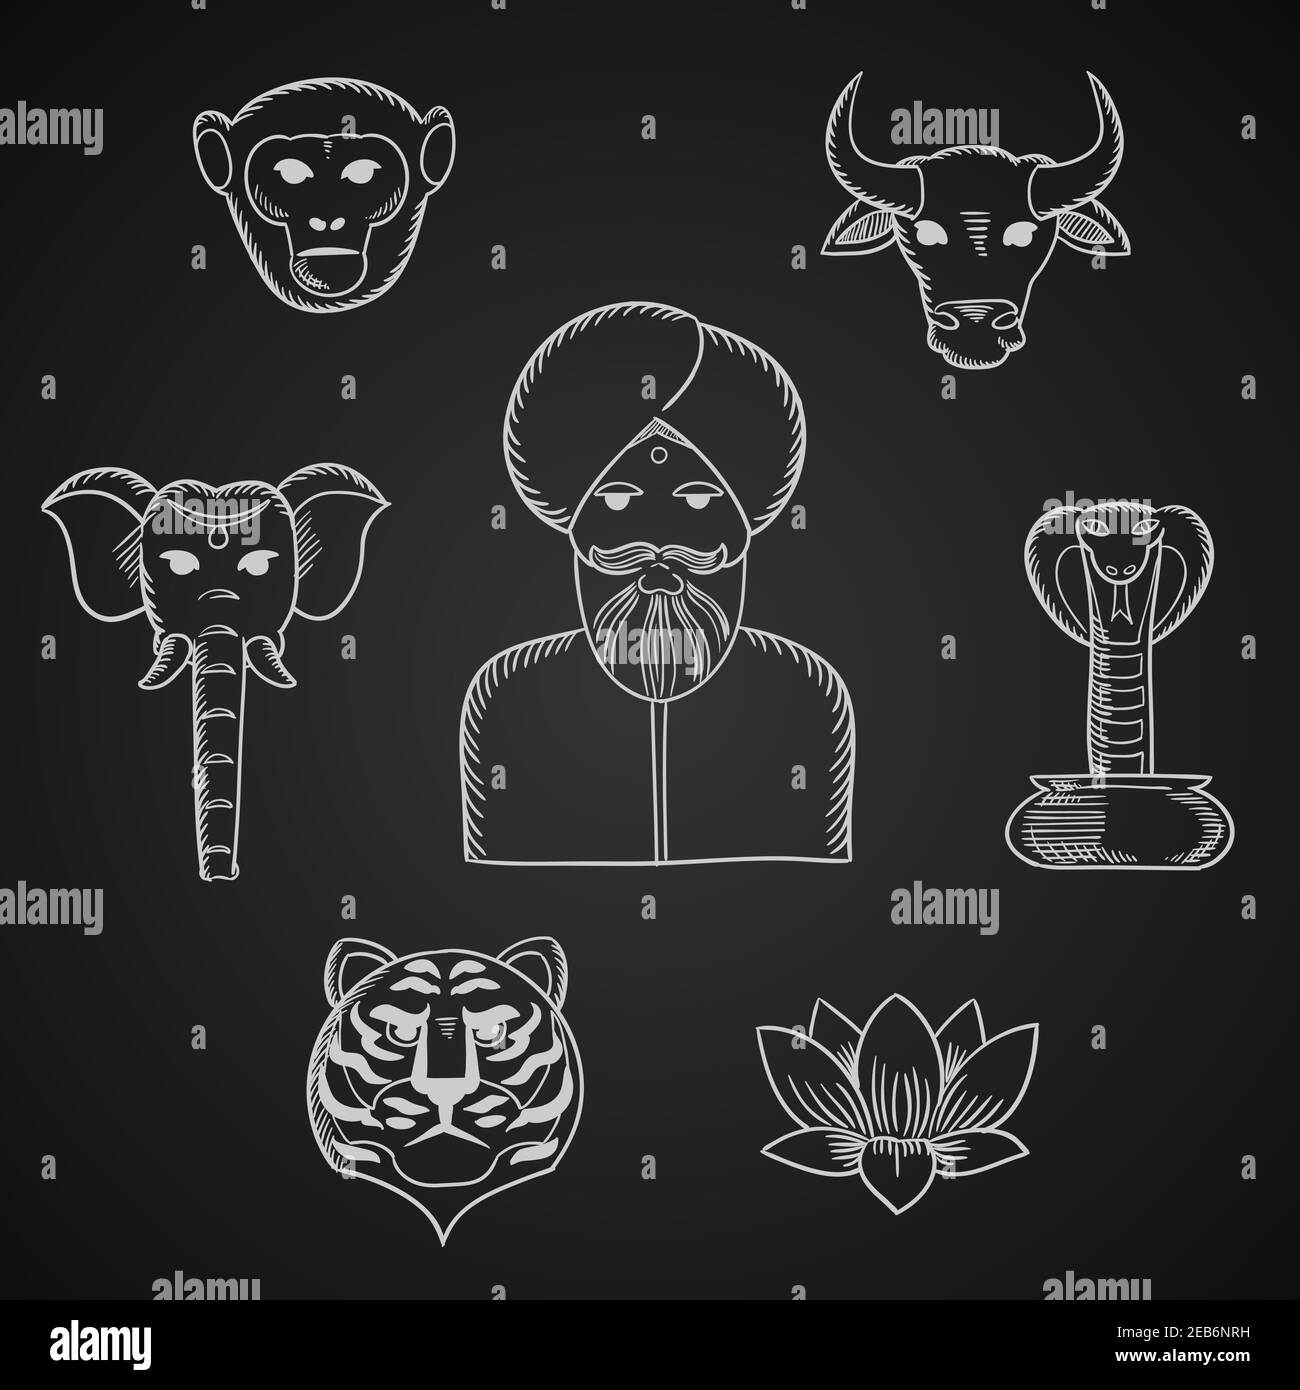 Indian animals of worship and national symbols in chalk style with indian man in turban, holy cow and elephant, cobra, monkey, tiger and lotus on blac Stock Vector